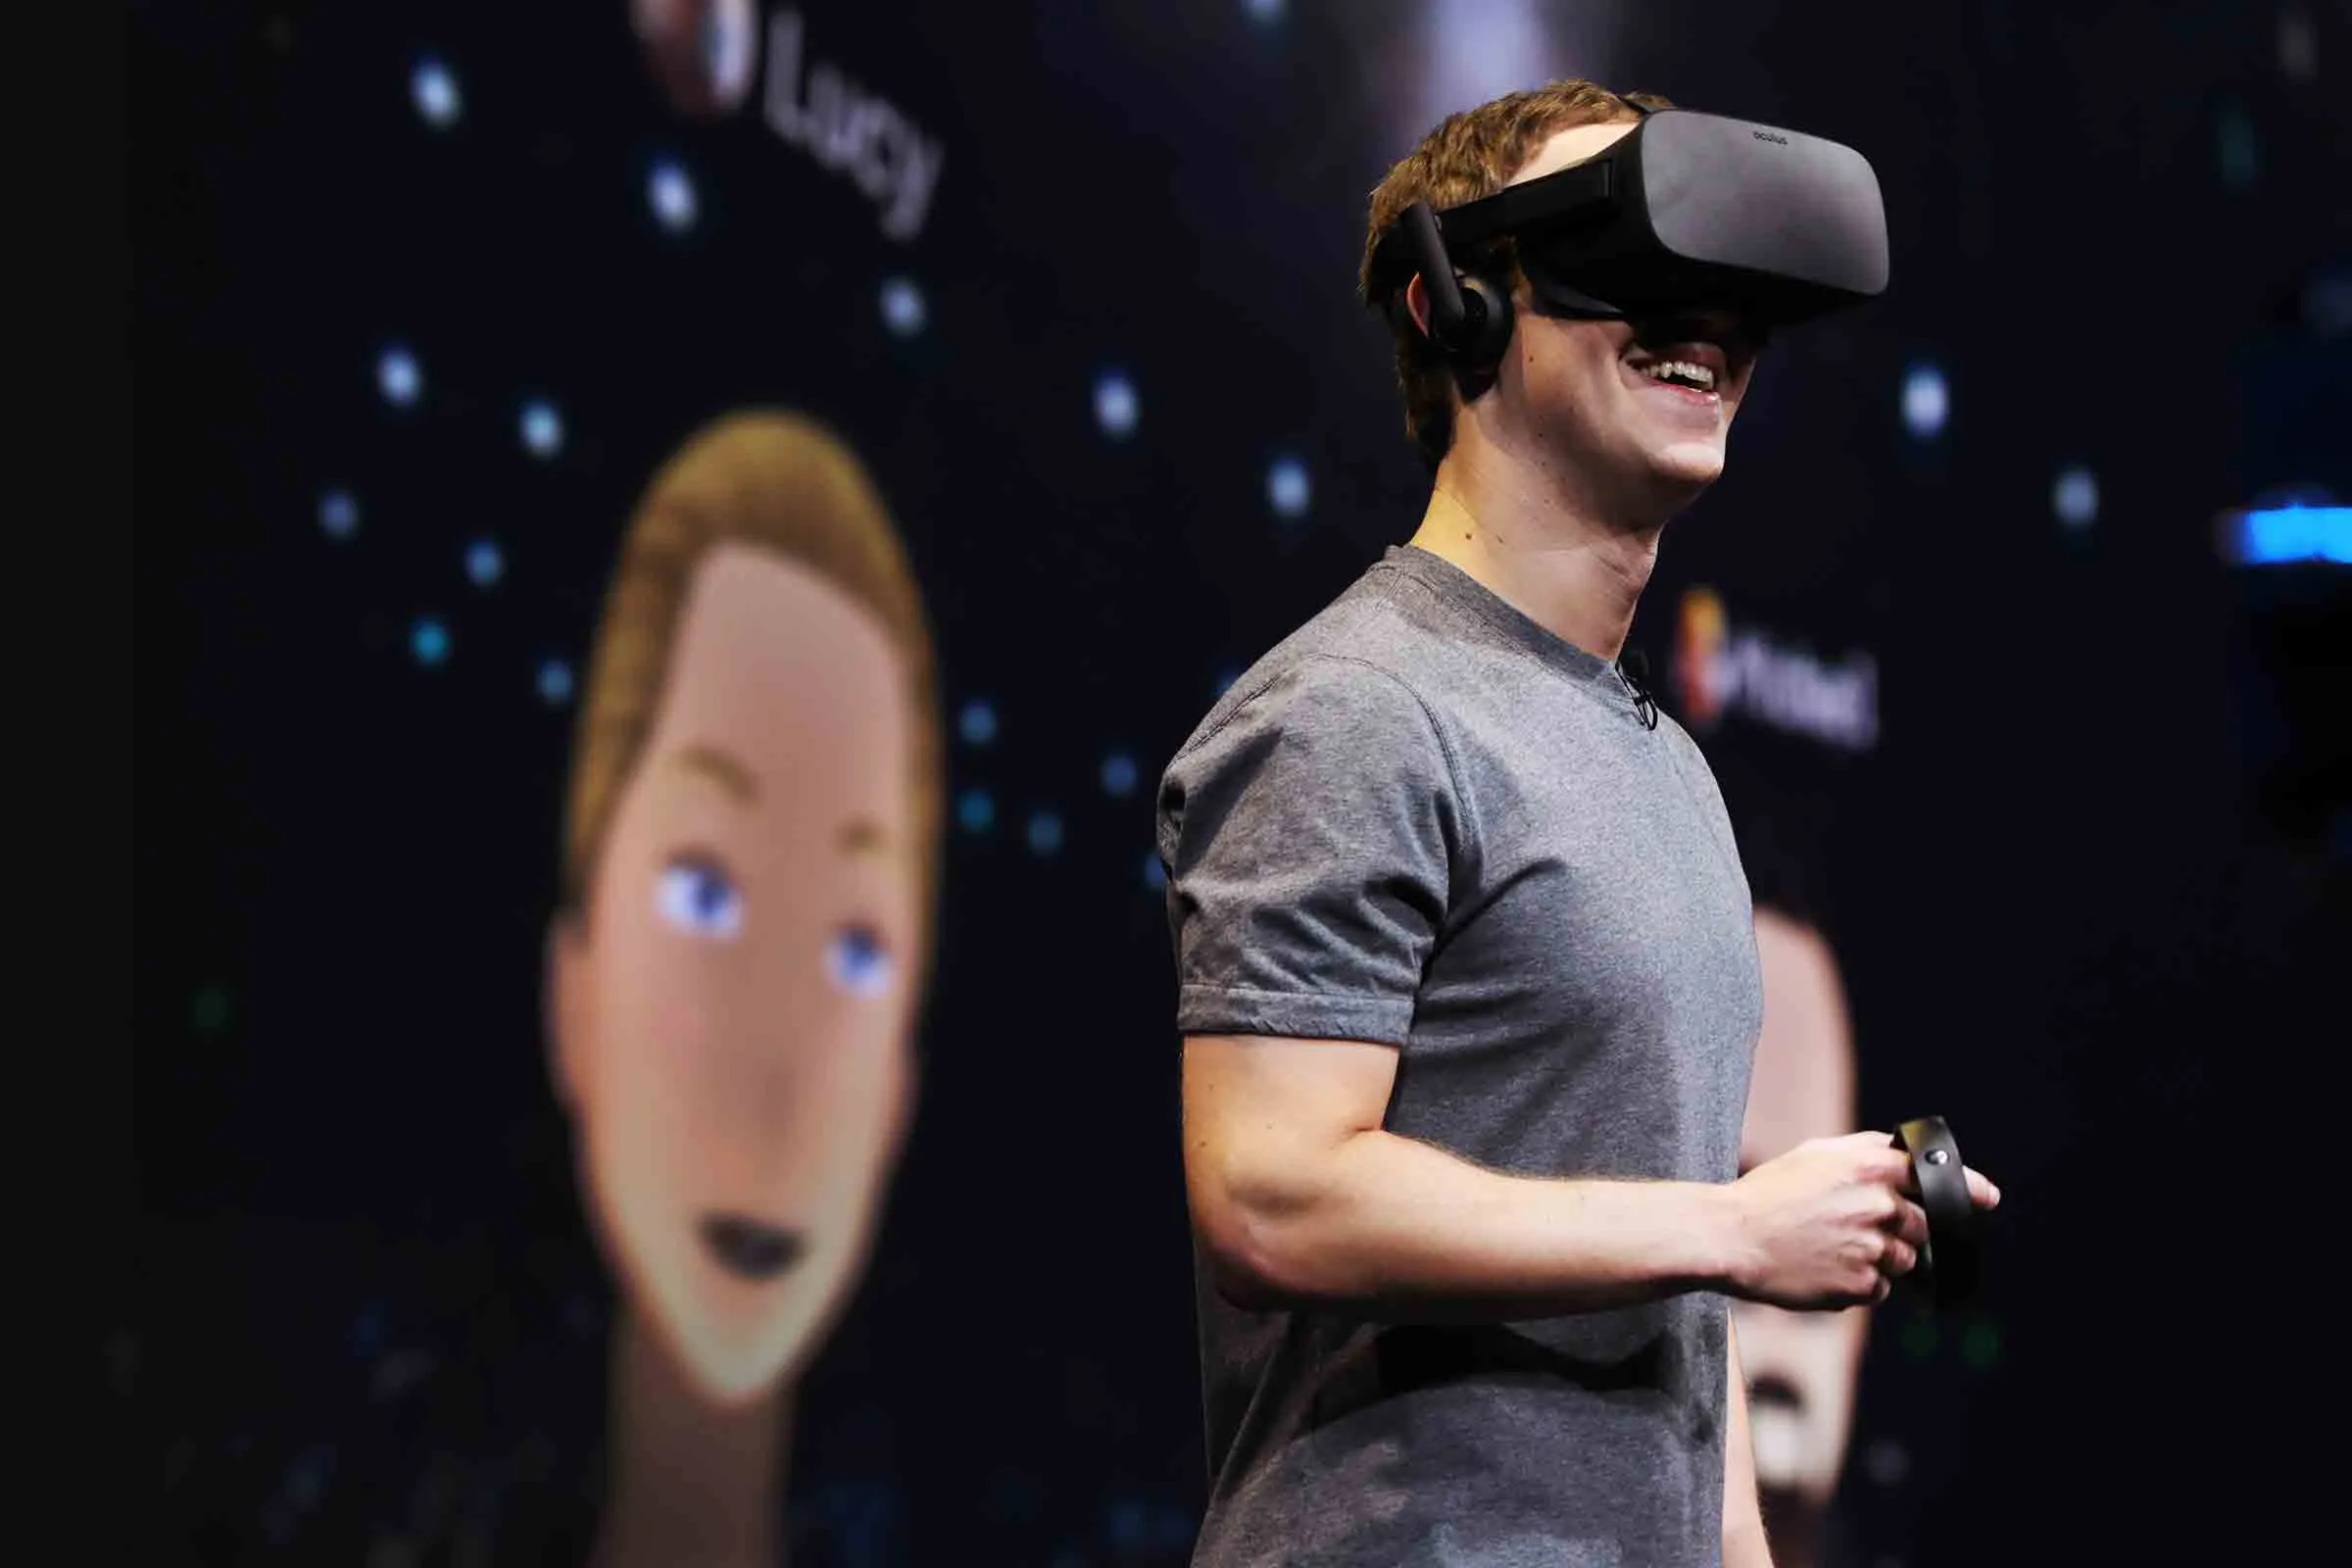 Is Mark Zuckerberg Teaming Up With LG for VR Headsets by Meta